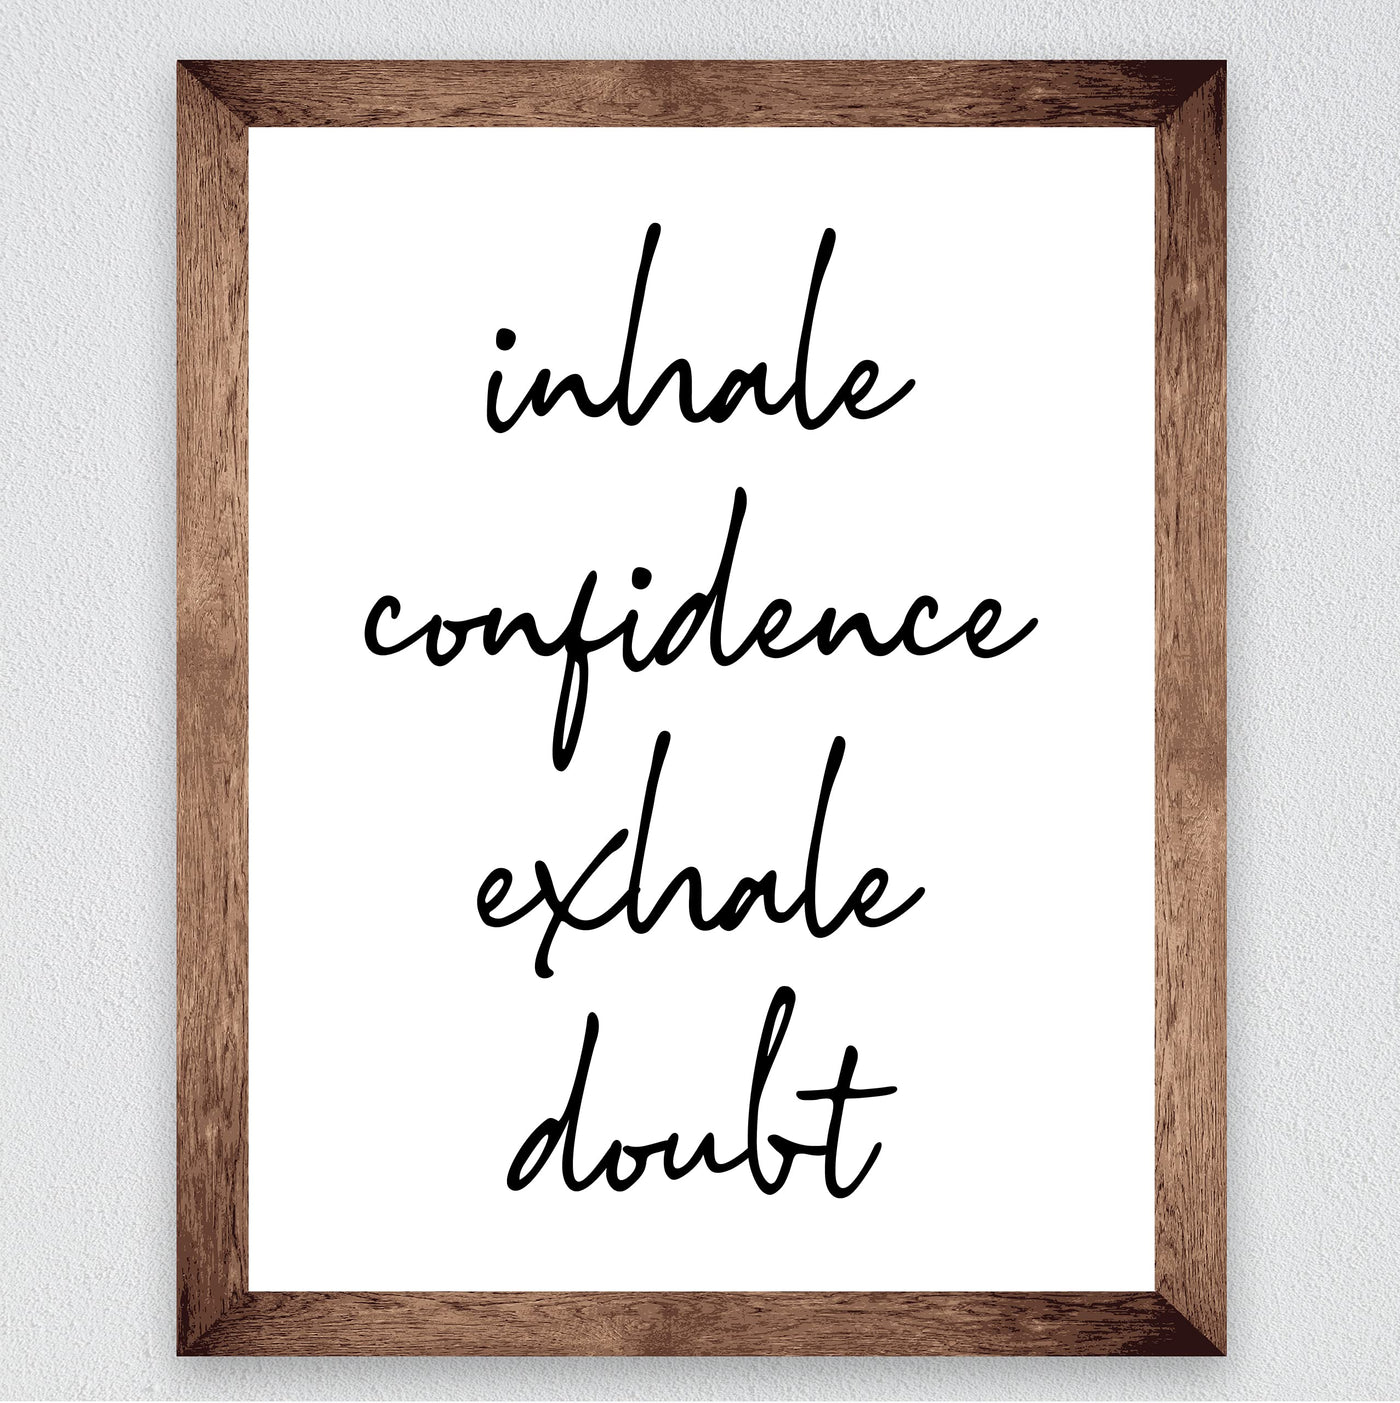 Inhale Confidence-Exhale Doubt-Spiritual Quotes Wall Art - 8 x 10" Inspirational Typographic Print-Ready to Frame. Motivational Home-Office-School-Yoga Studio-Spa Decor. Great Reminder to Breathe!